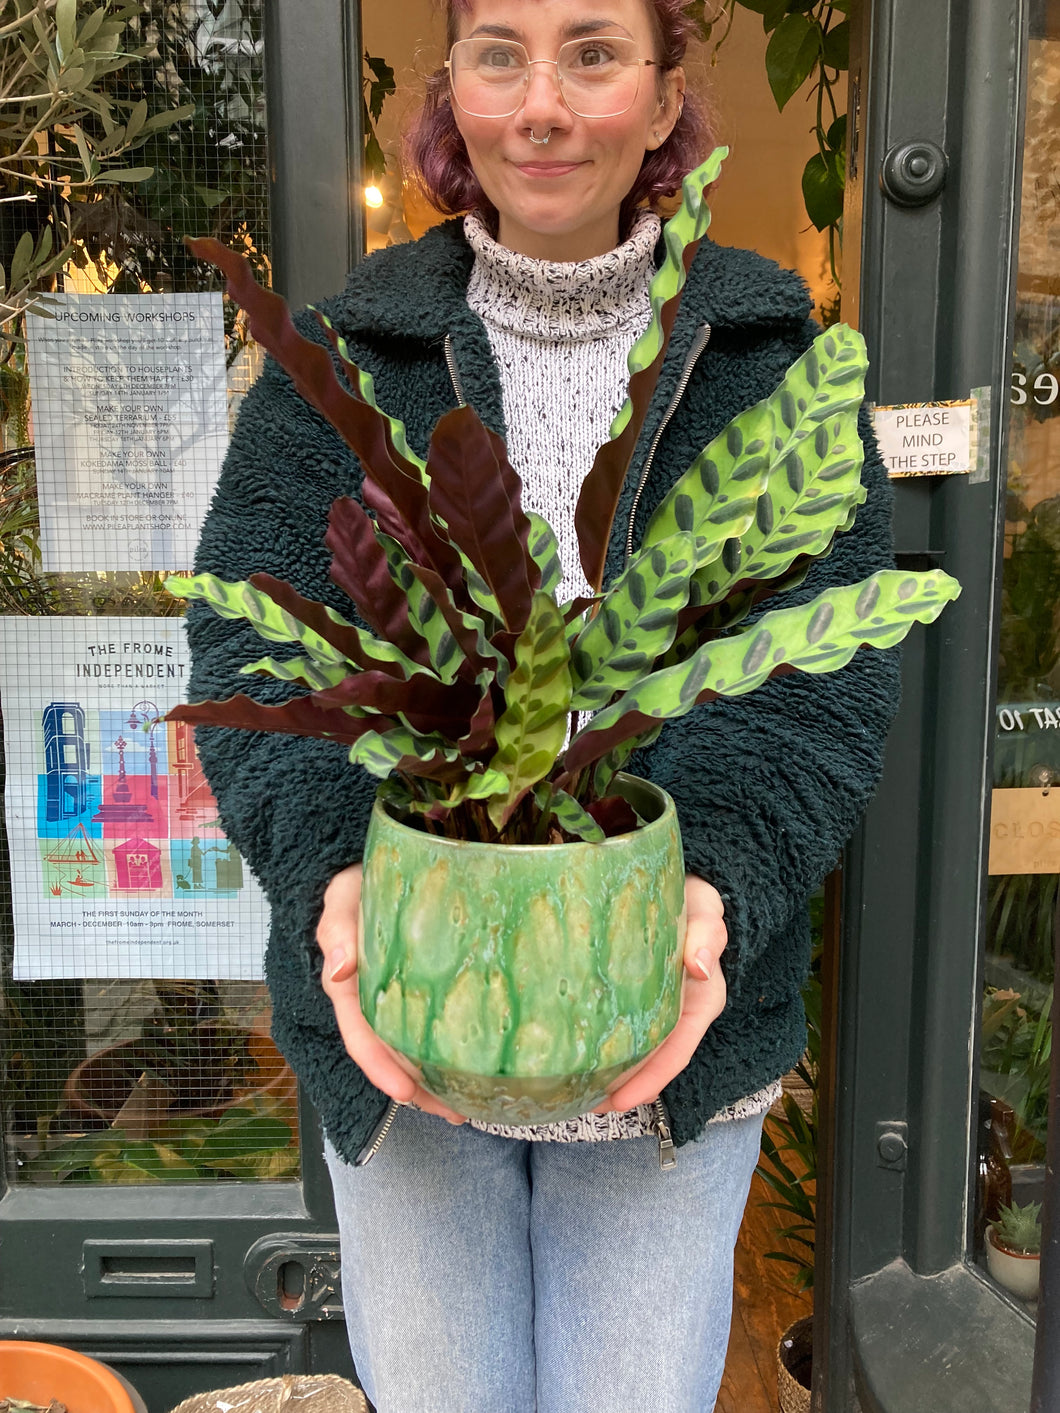 Calathea lancifolia - Local Delivery or Local Pick Up Only*